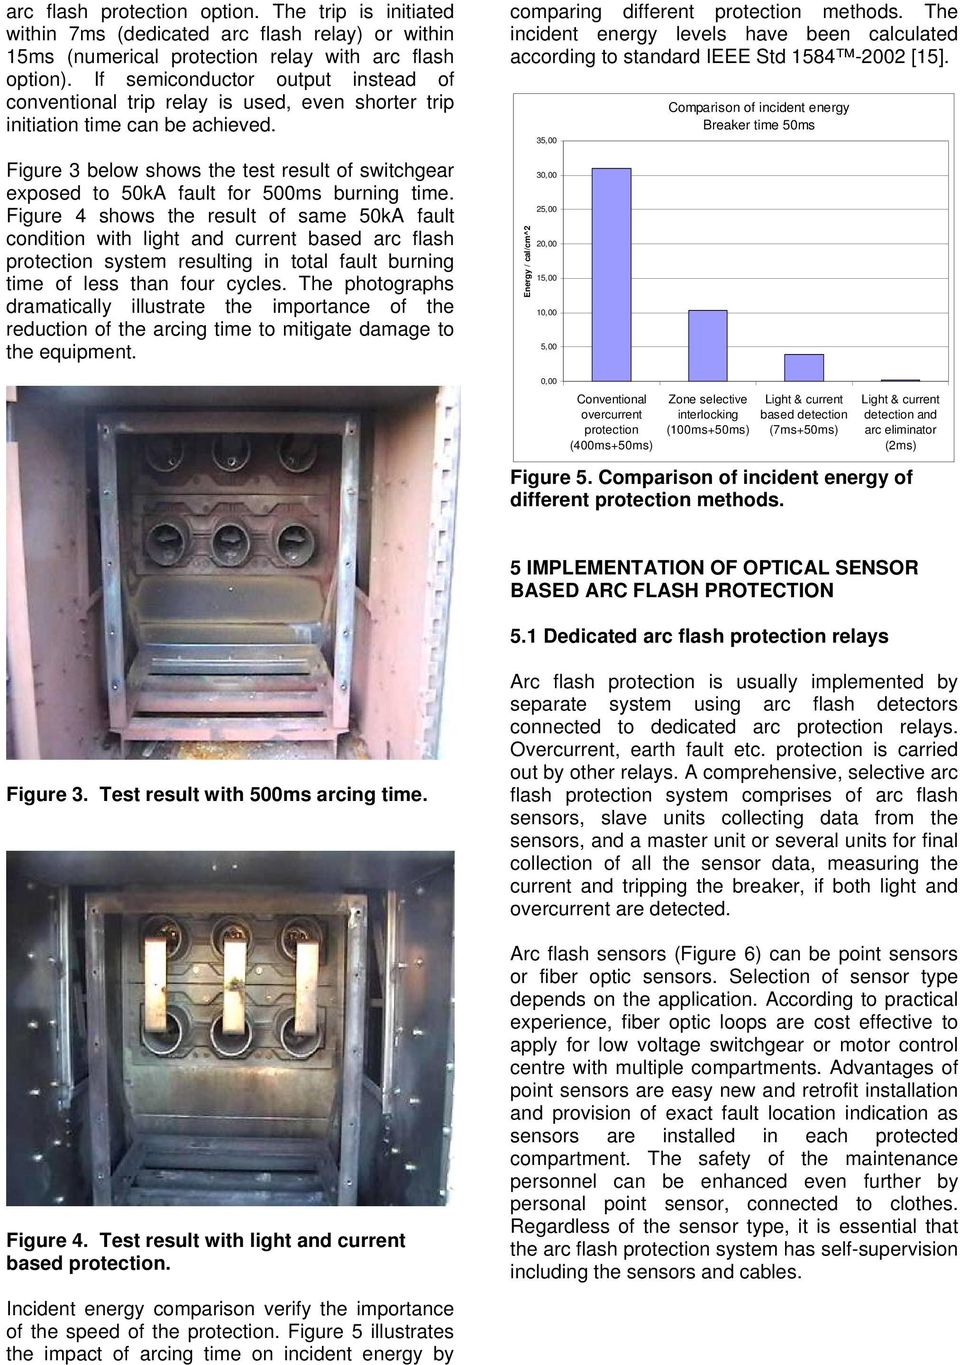 Figure 3 below shows the test result of switchgear exposed to 50kA fault for 500ms burning time.